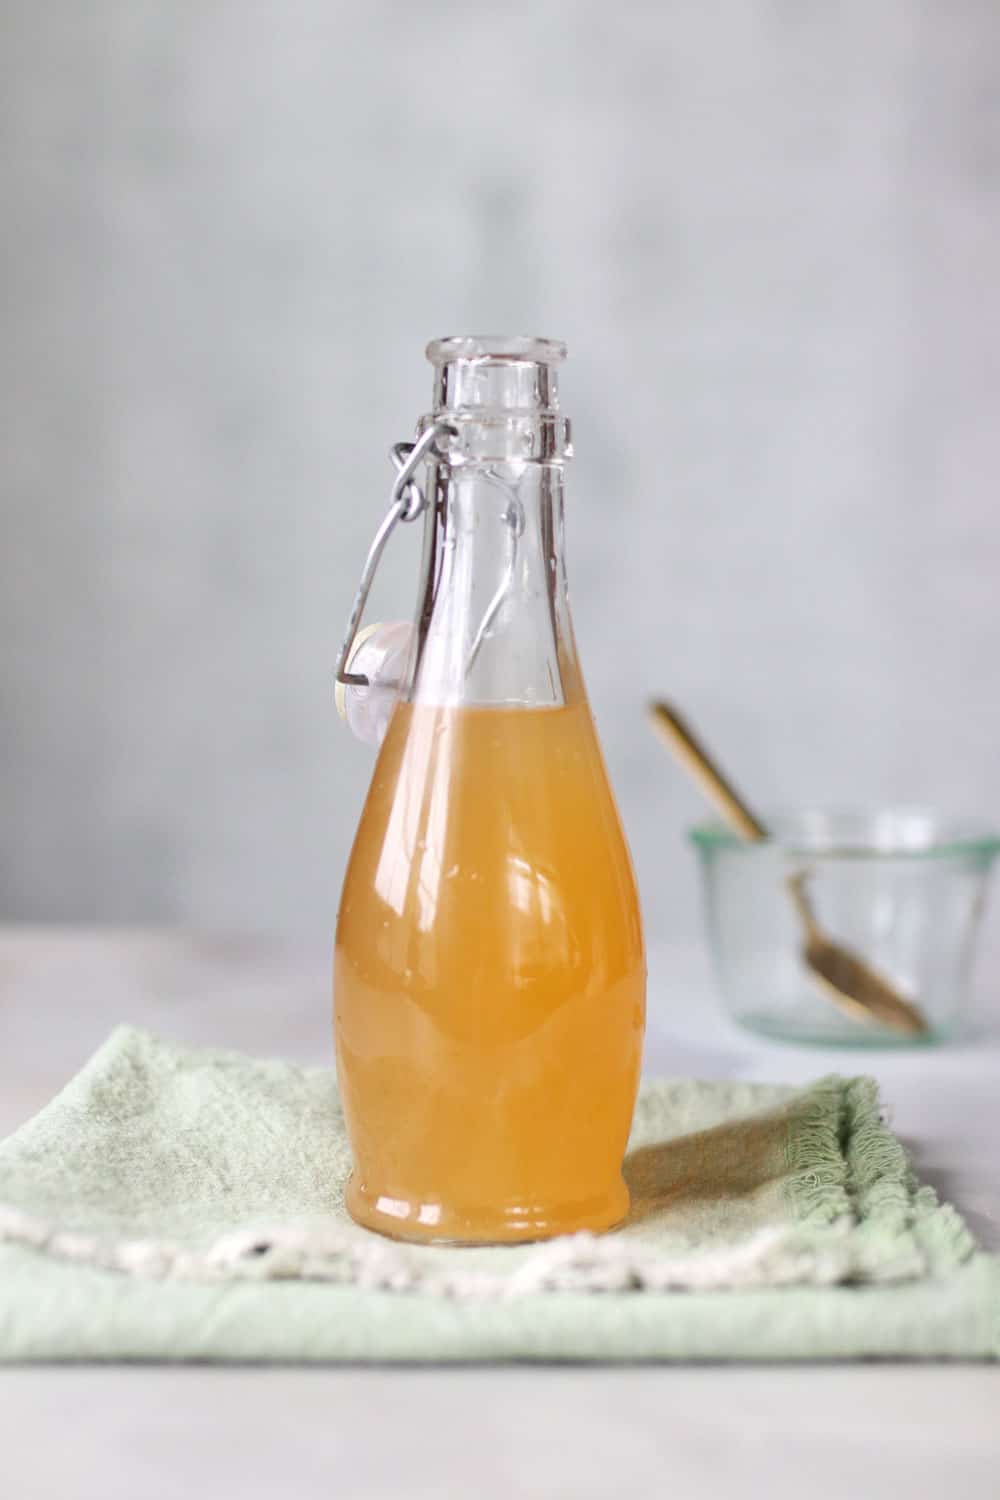 Yes, you can make your own apple cider vinegar! here’s how.